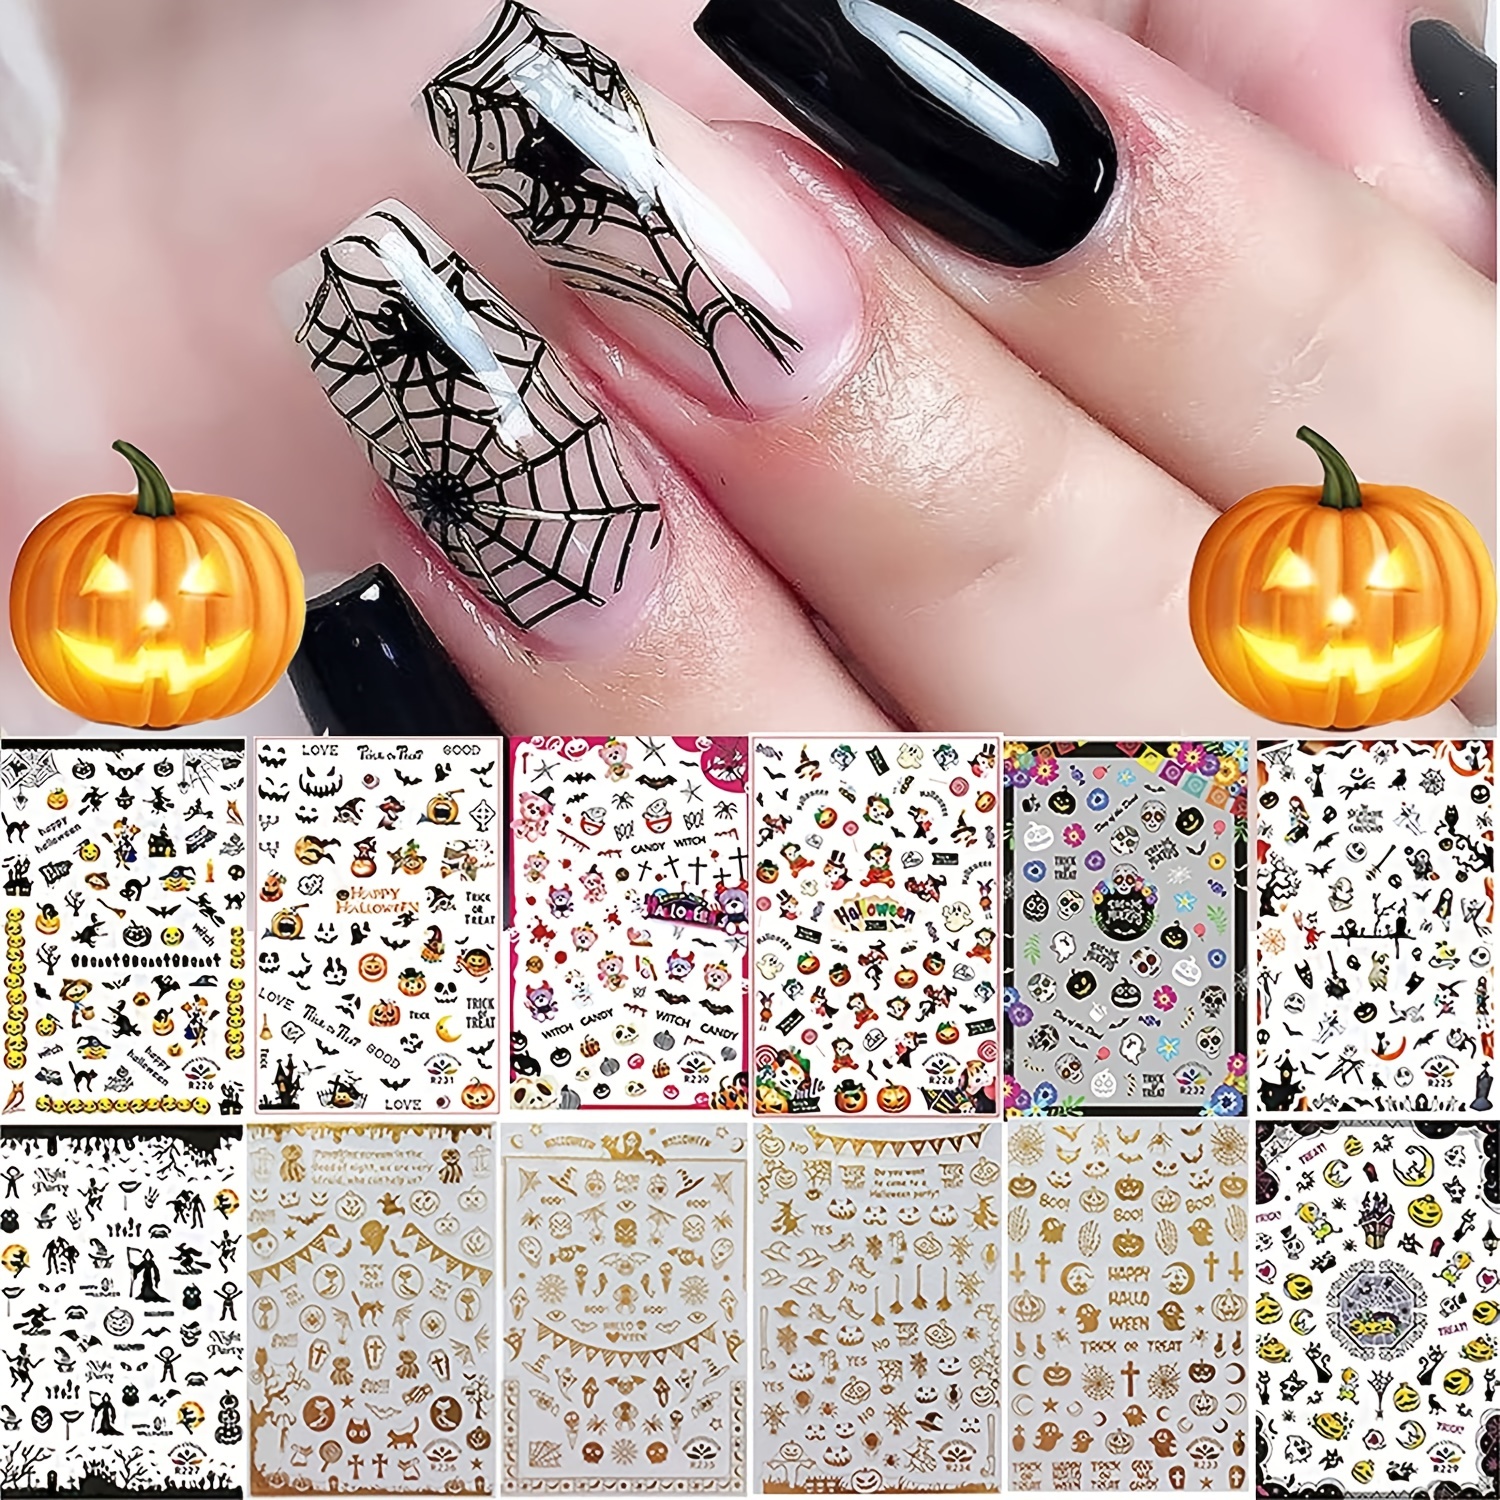 5pc Western Halloween Alloy 3d Nails Art Decorat Gold Silver Skull Spider  Hand Skeleton Charms Design Diy Nail Jewelry Accessory - Rhinestones &  Decorations - AliExpress